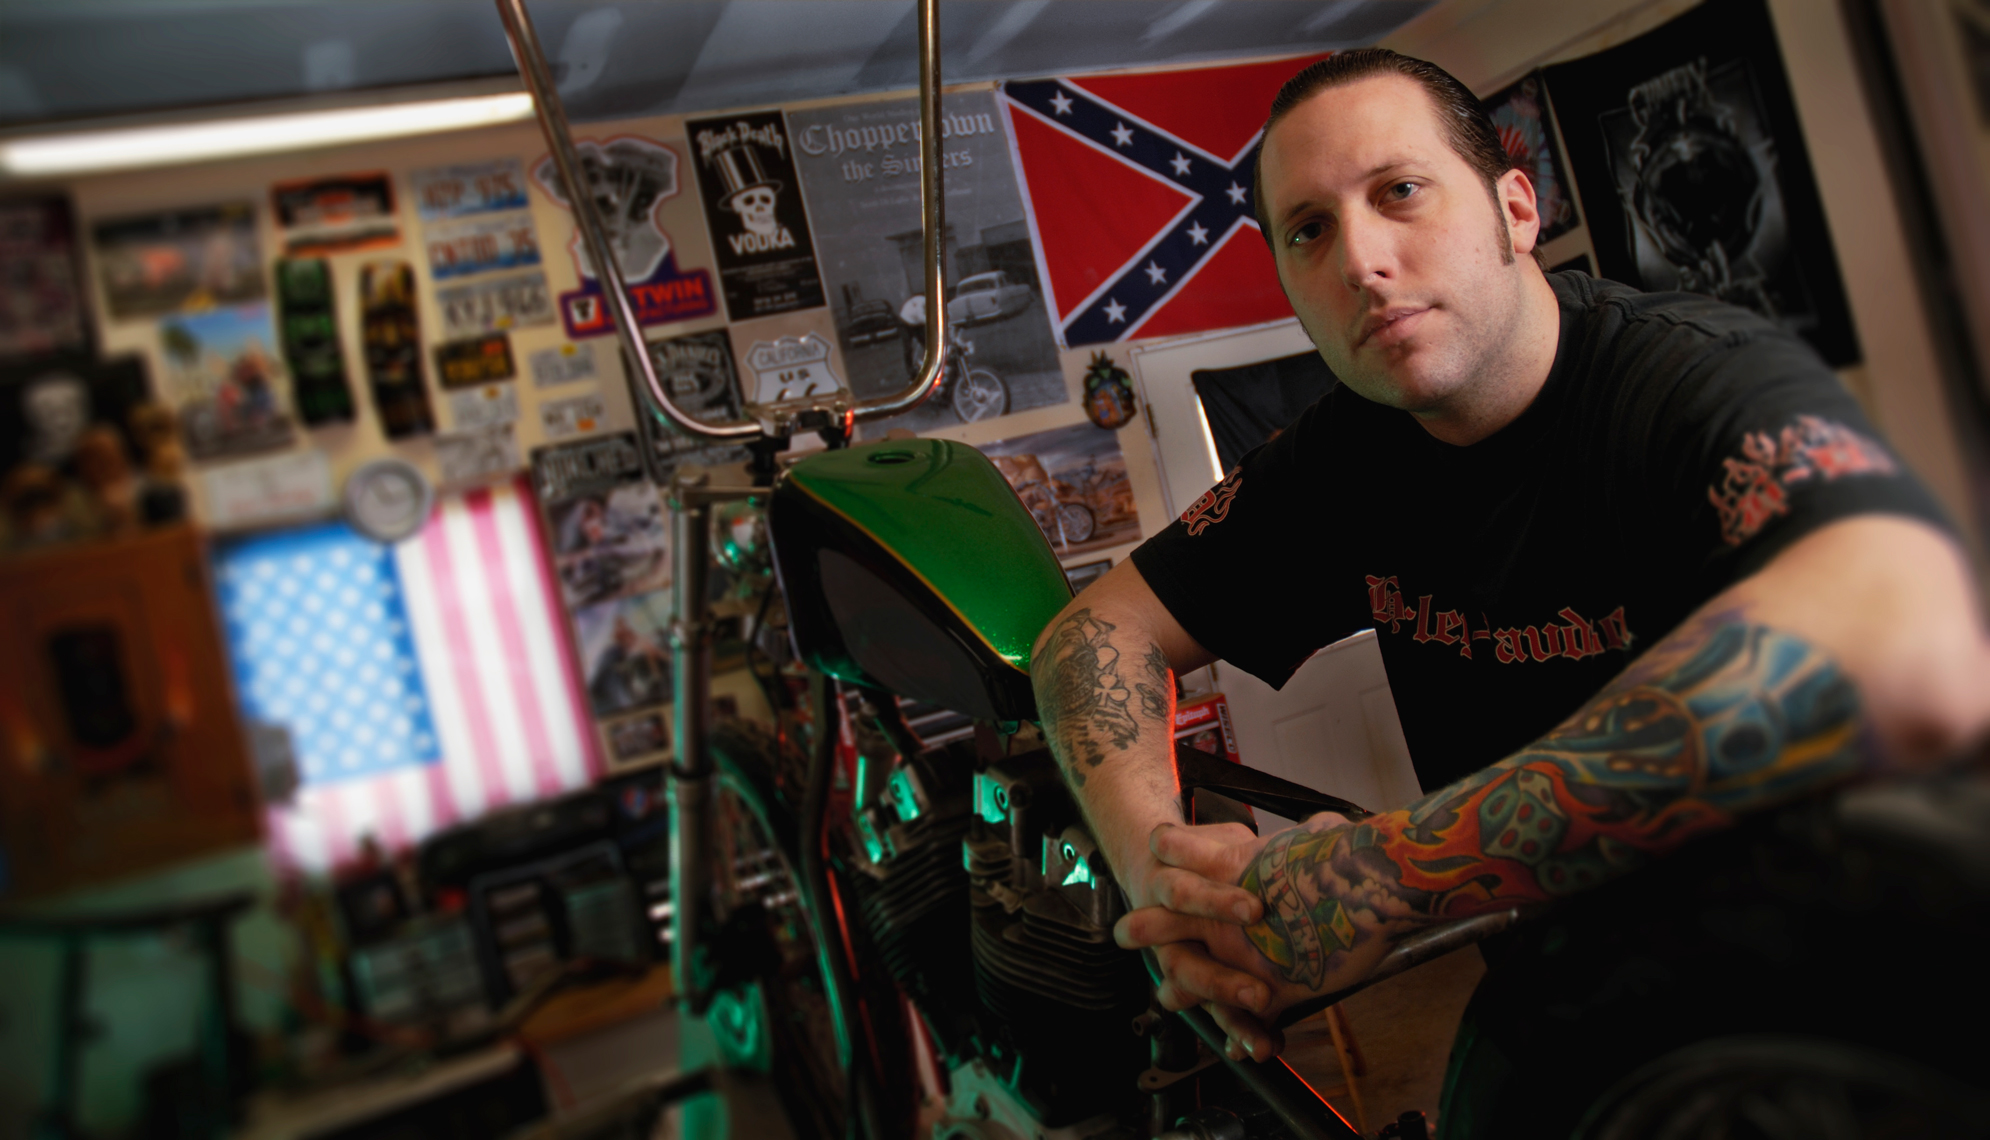 andrew-young-photography-moody-portrait-man-chicago-photographer-motorcycle-tattoos-confederate-flag-editorial-portraits-illinois-portrait-photographer-la-los-angeles-california-illinois-new-york